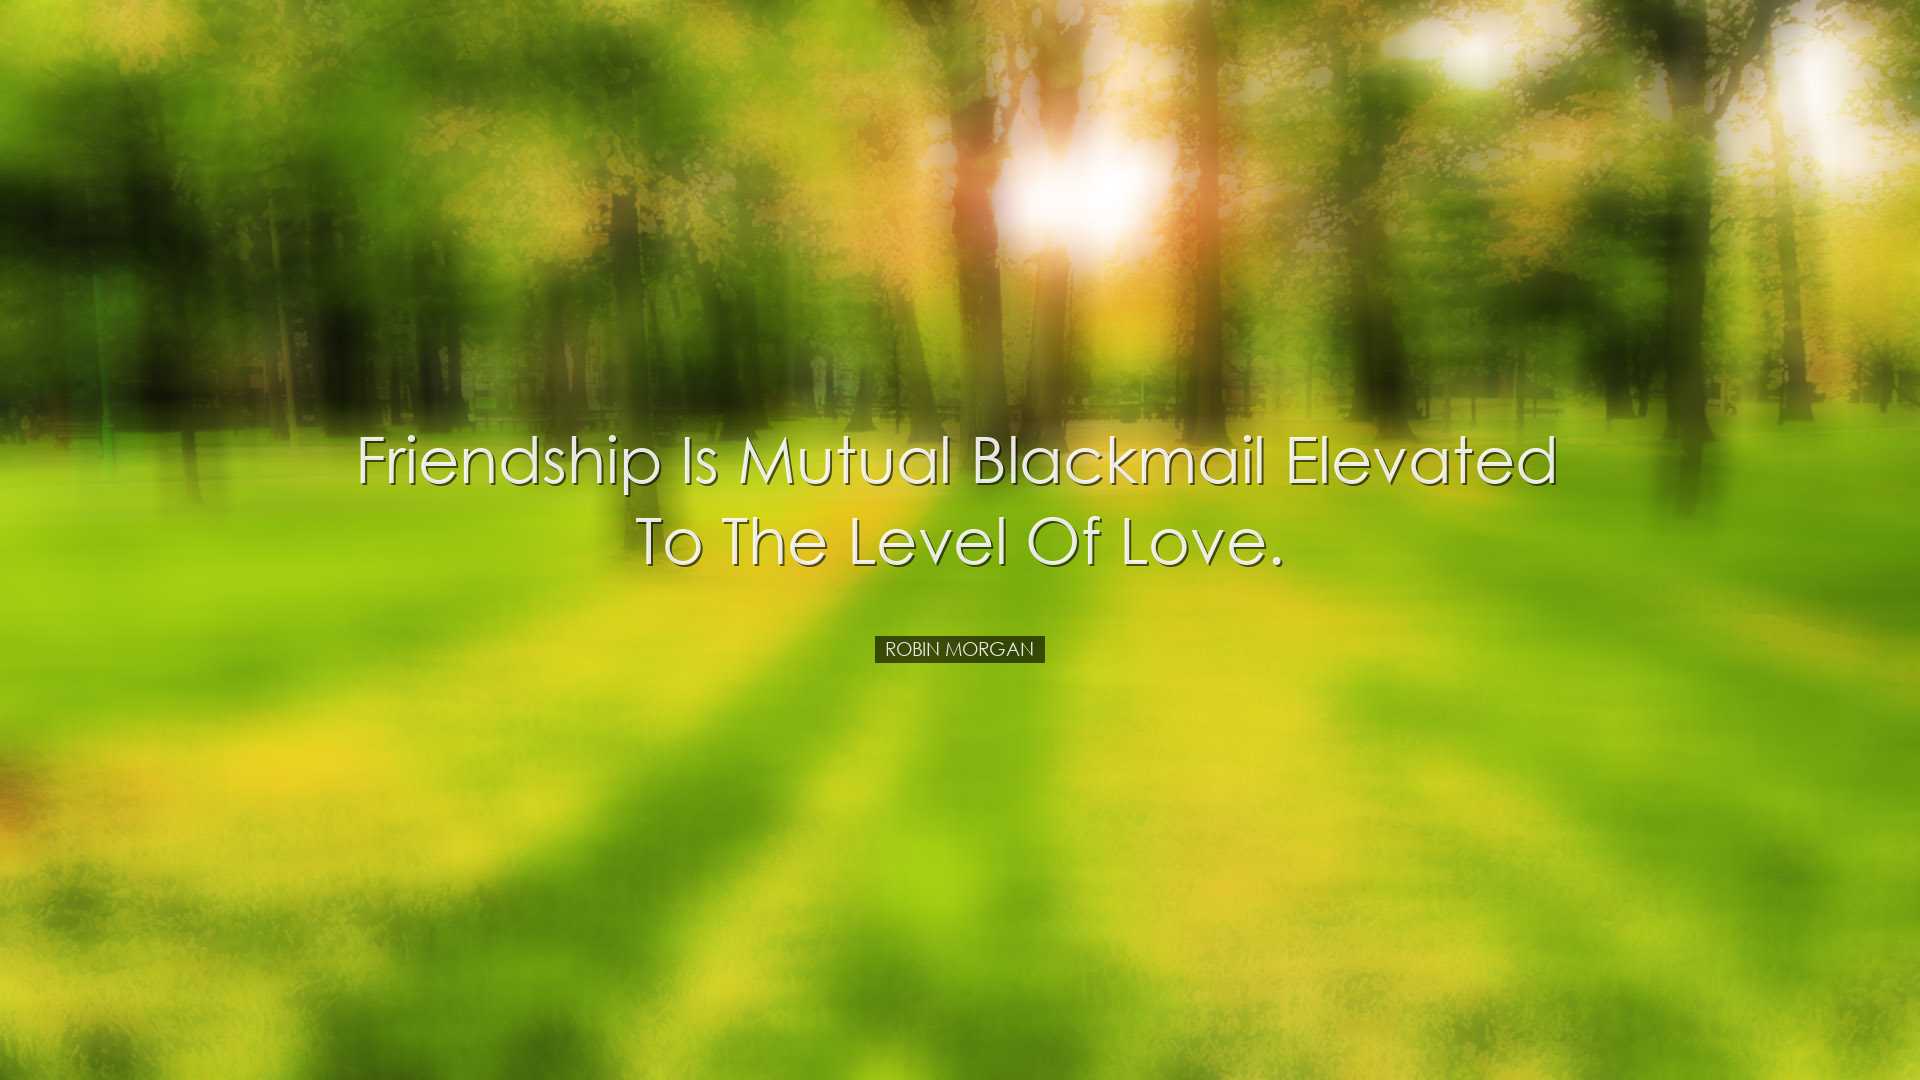 Friendship is mutual blackmail elevated to the level of love. - Ro